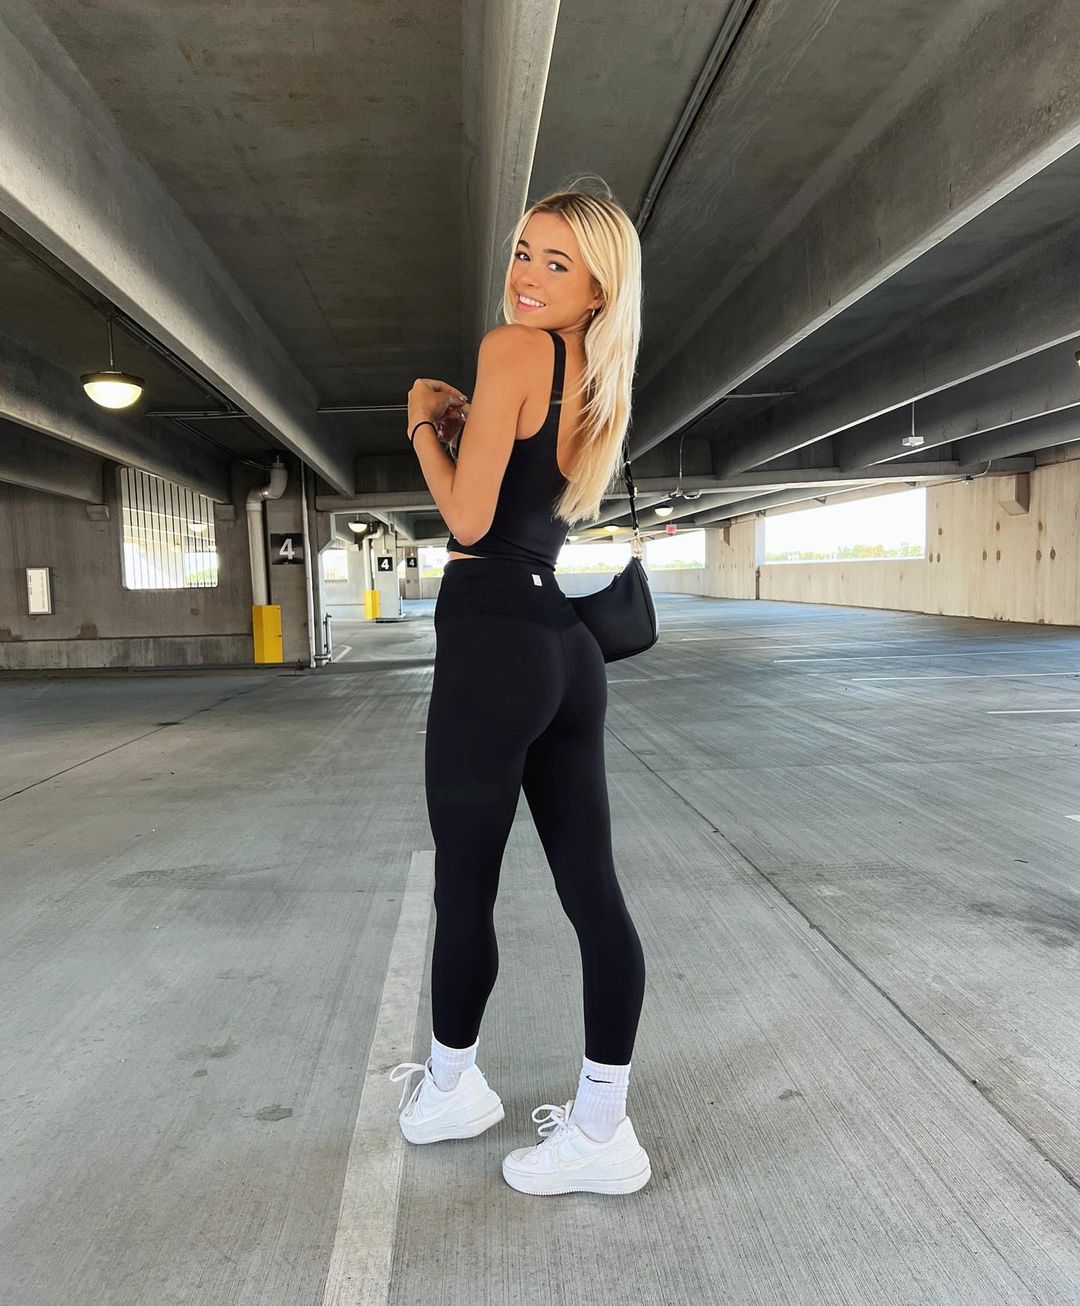 LSU Gymnast Olivia Dunne Goes Viral Rocking Tight Outfit In Parking